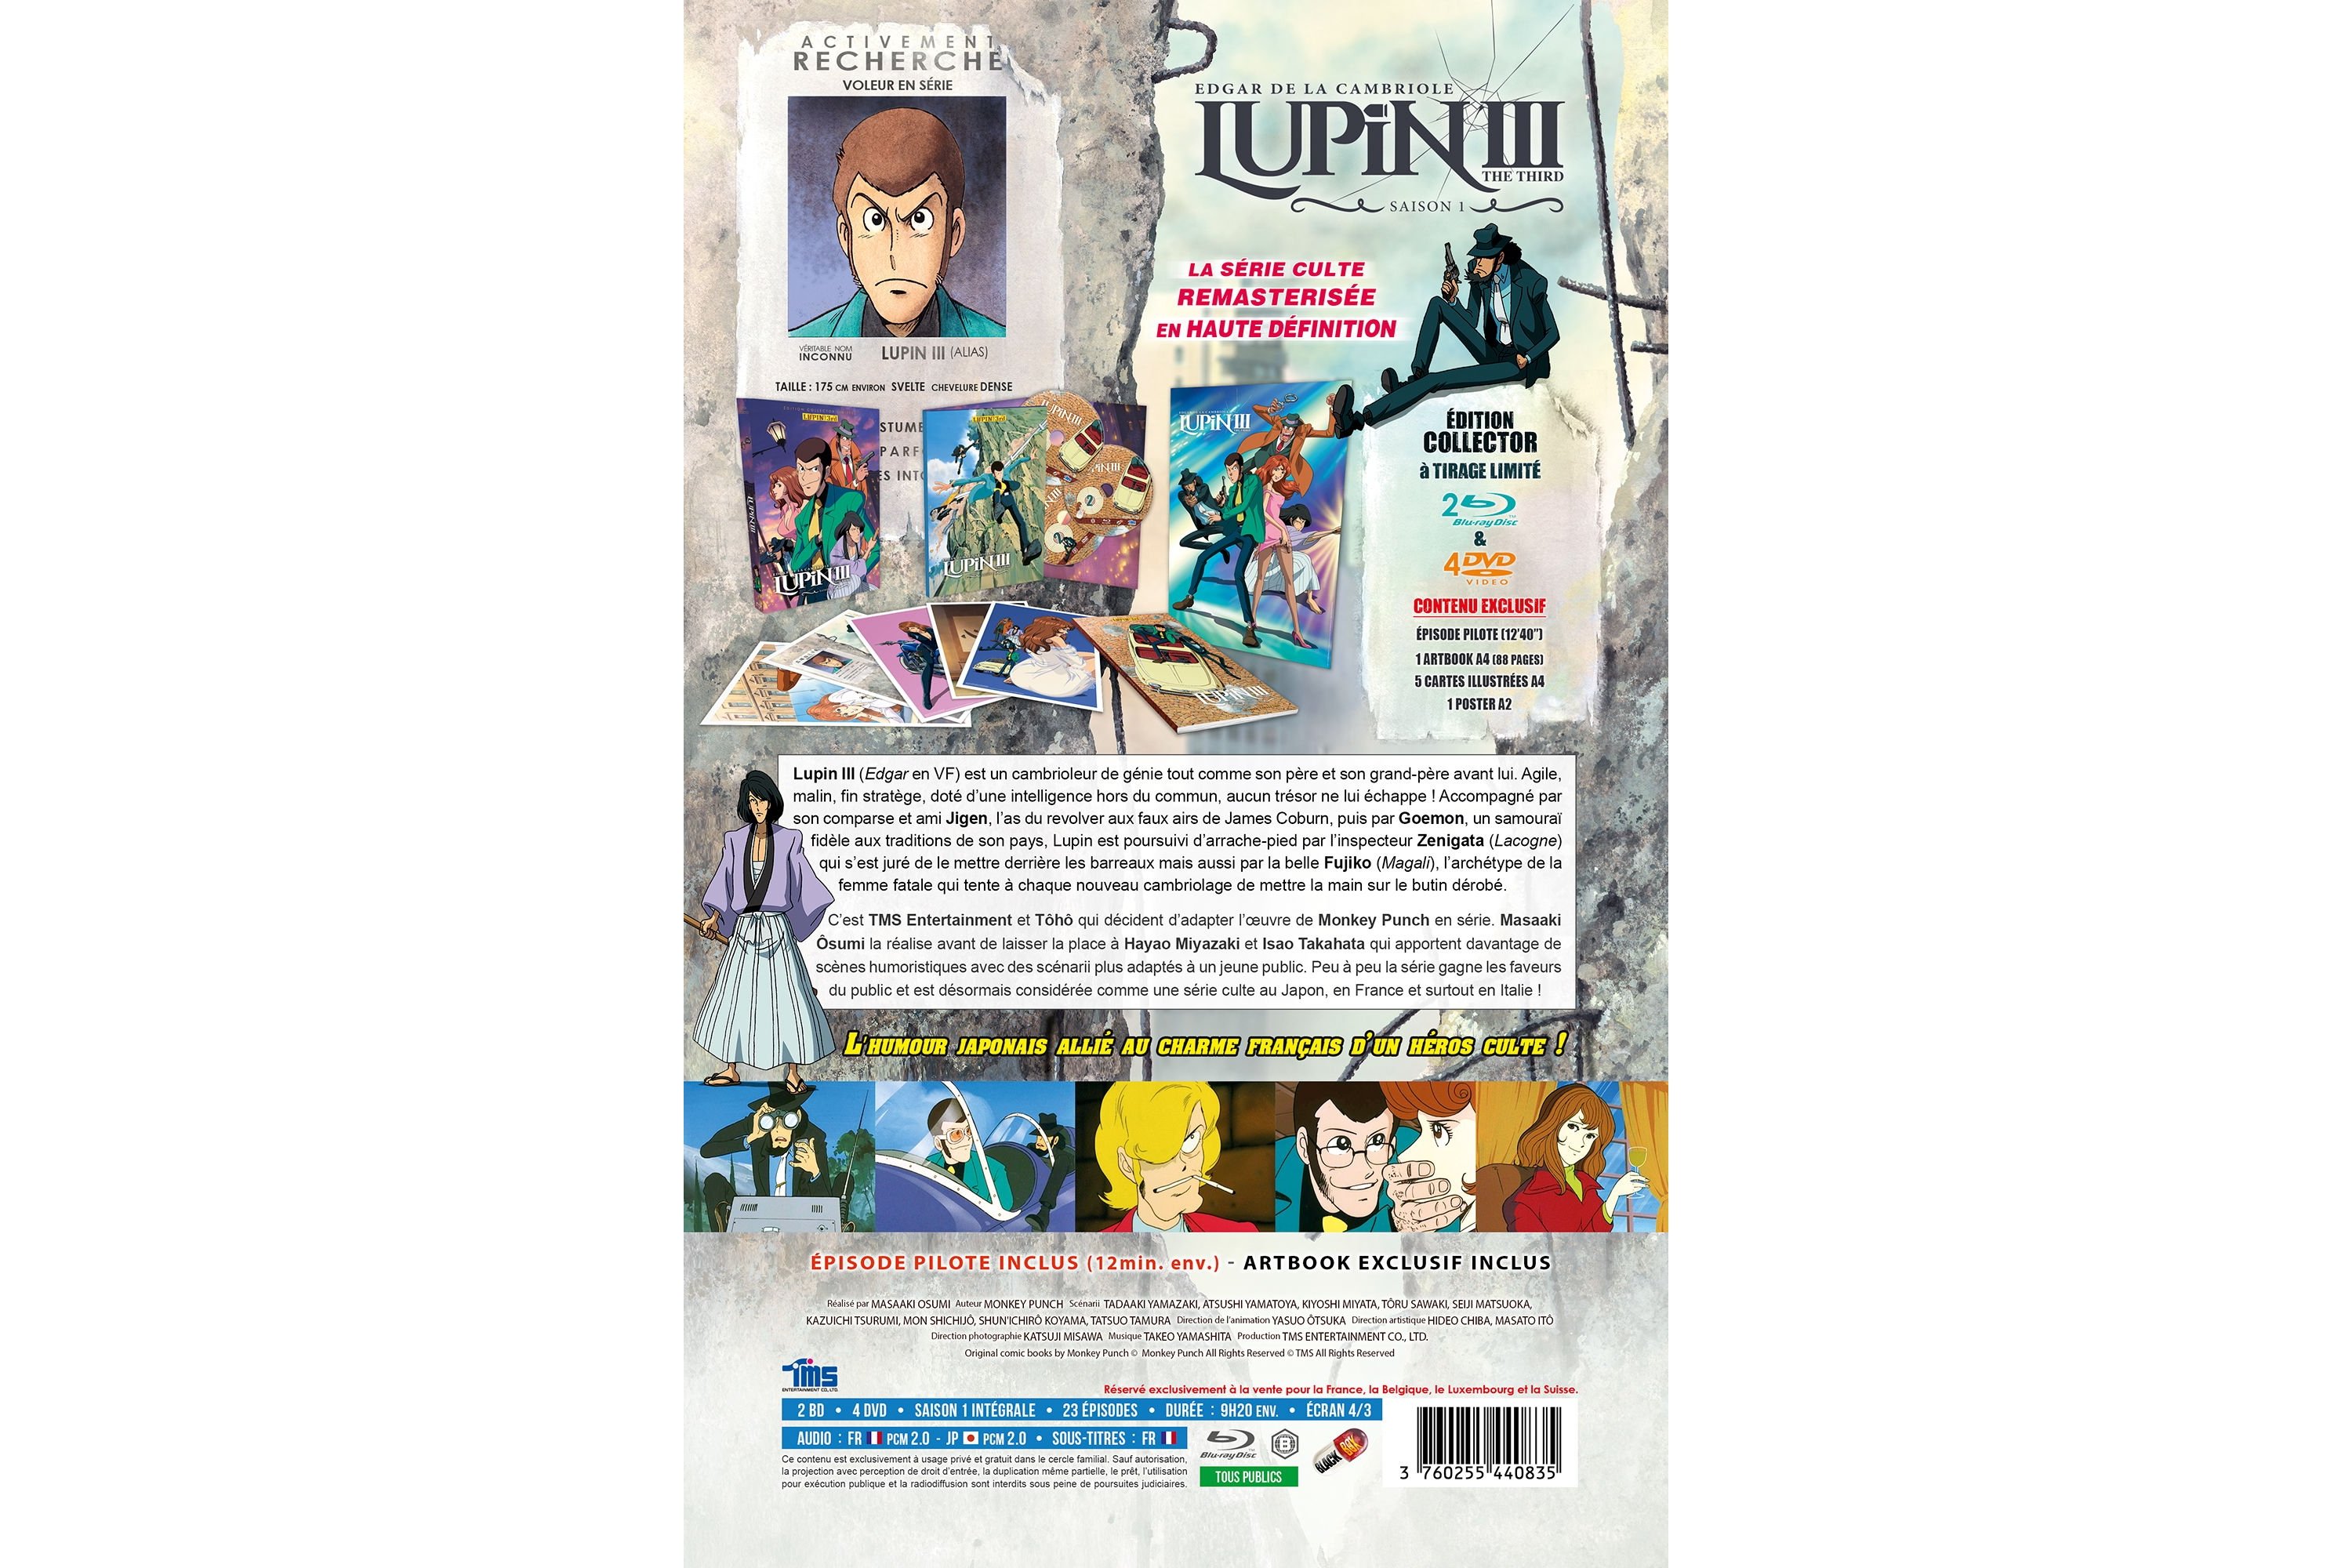 LAventure italienne Lupin the Third Intégrale Edition Collector 